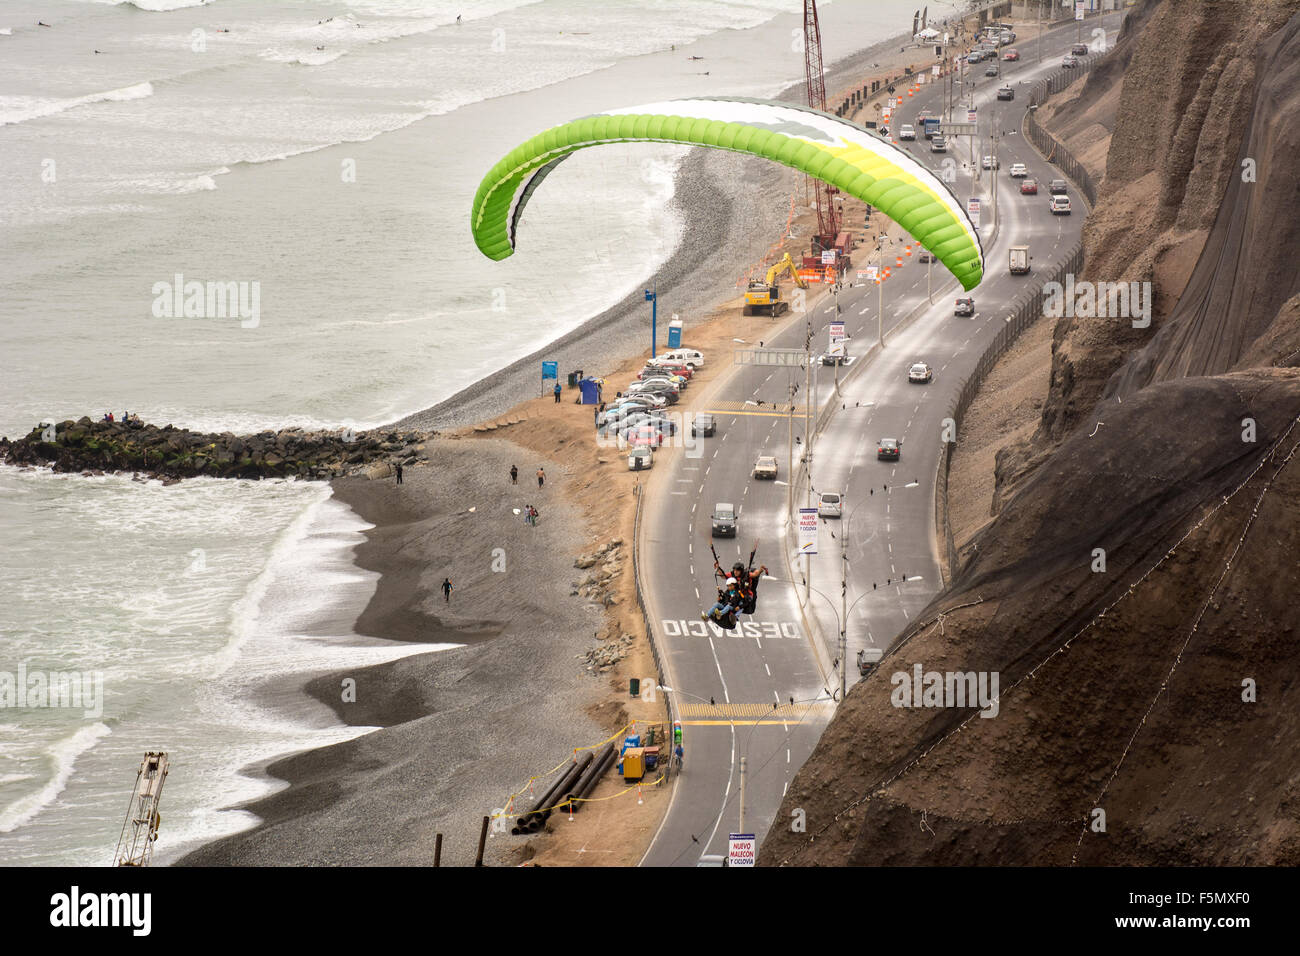 Tourist paragliding off the Larcomar seafront area of Lima city in Peru overlooking the pacific ocean and Costa Verde highway Stock Photo